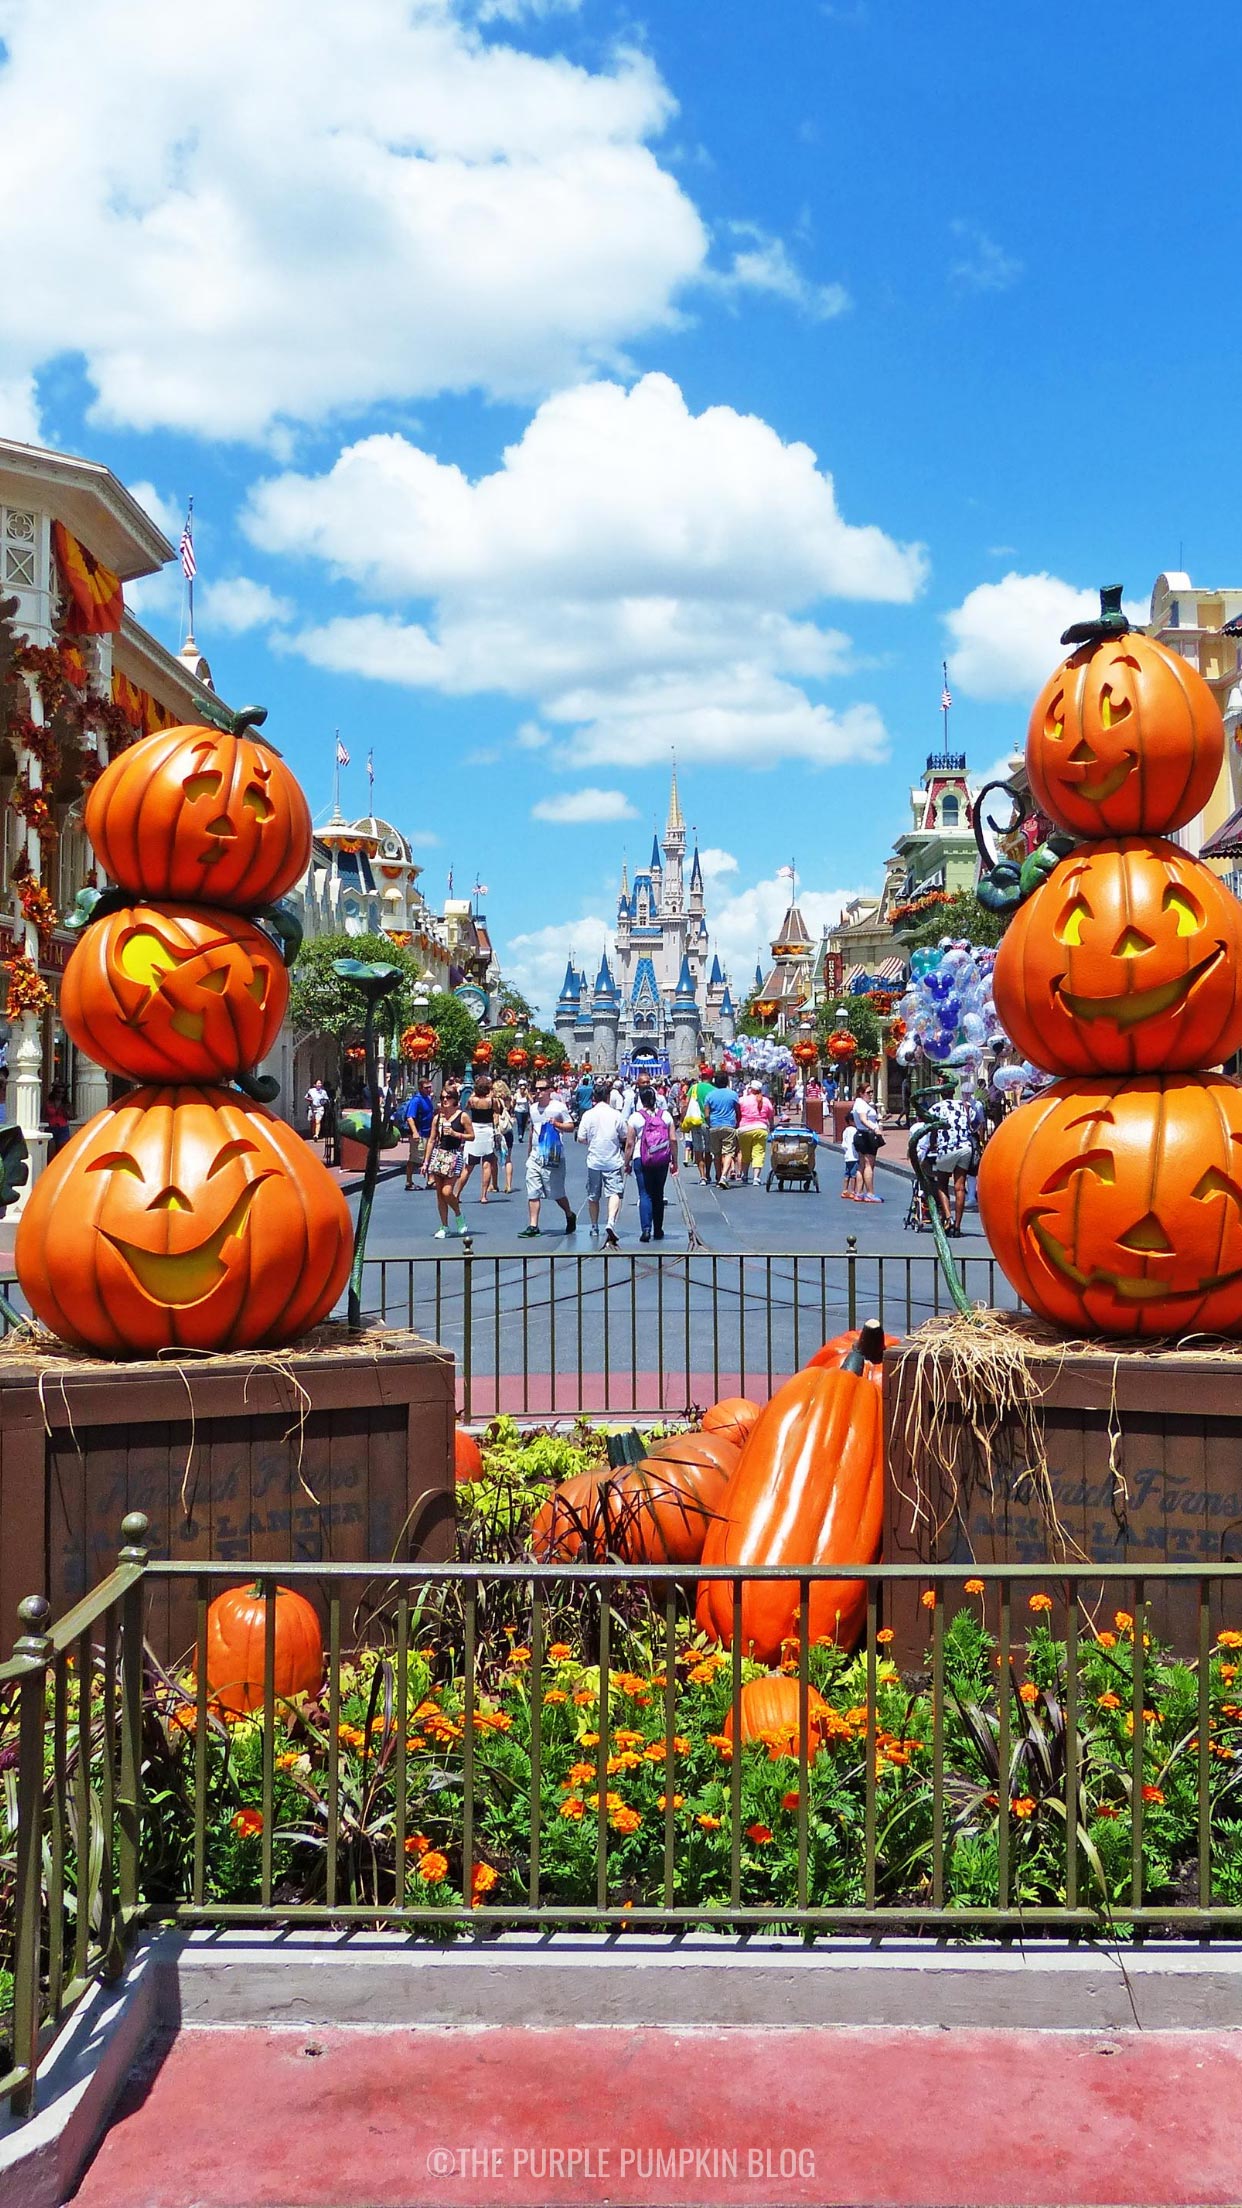 Disney Fall iPhone Wallpaper to Download for Free!